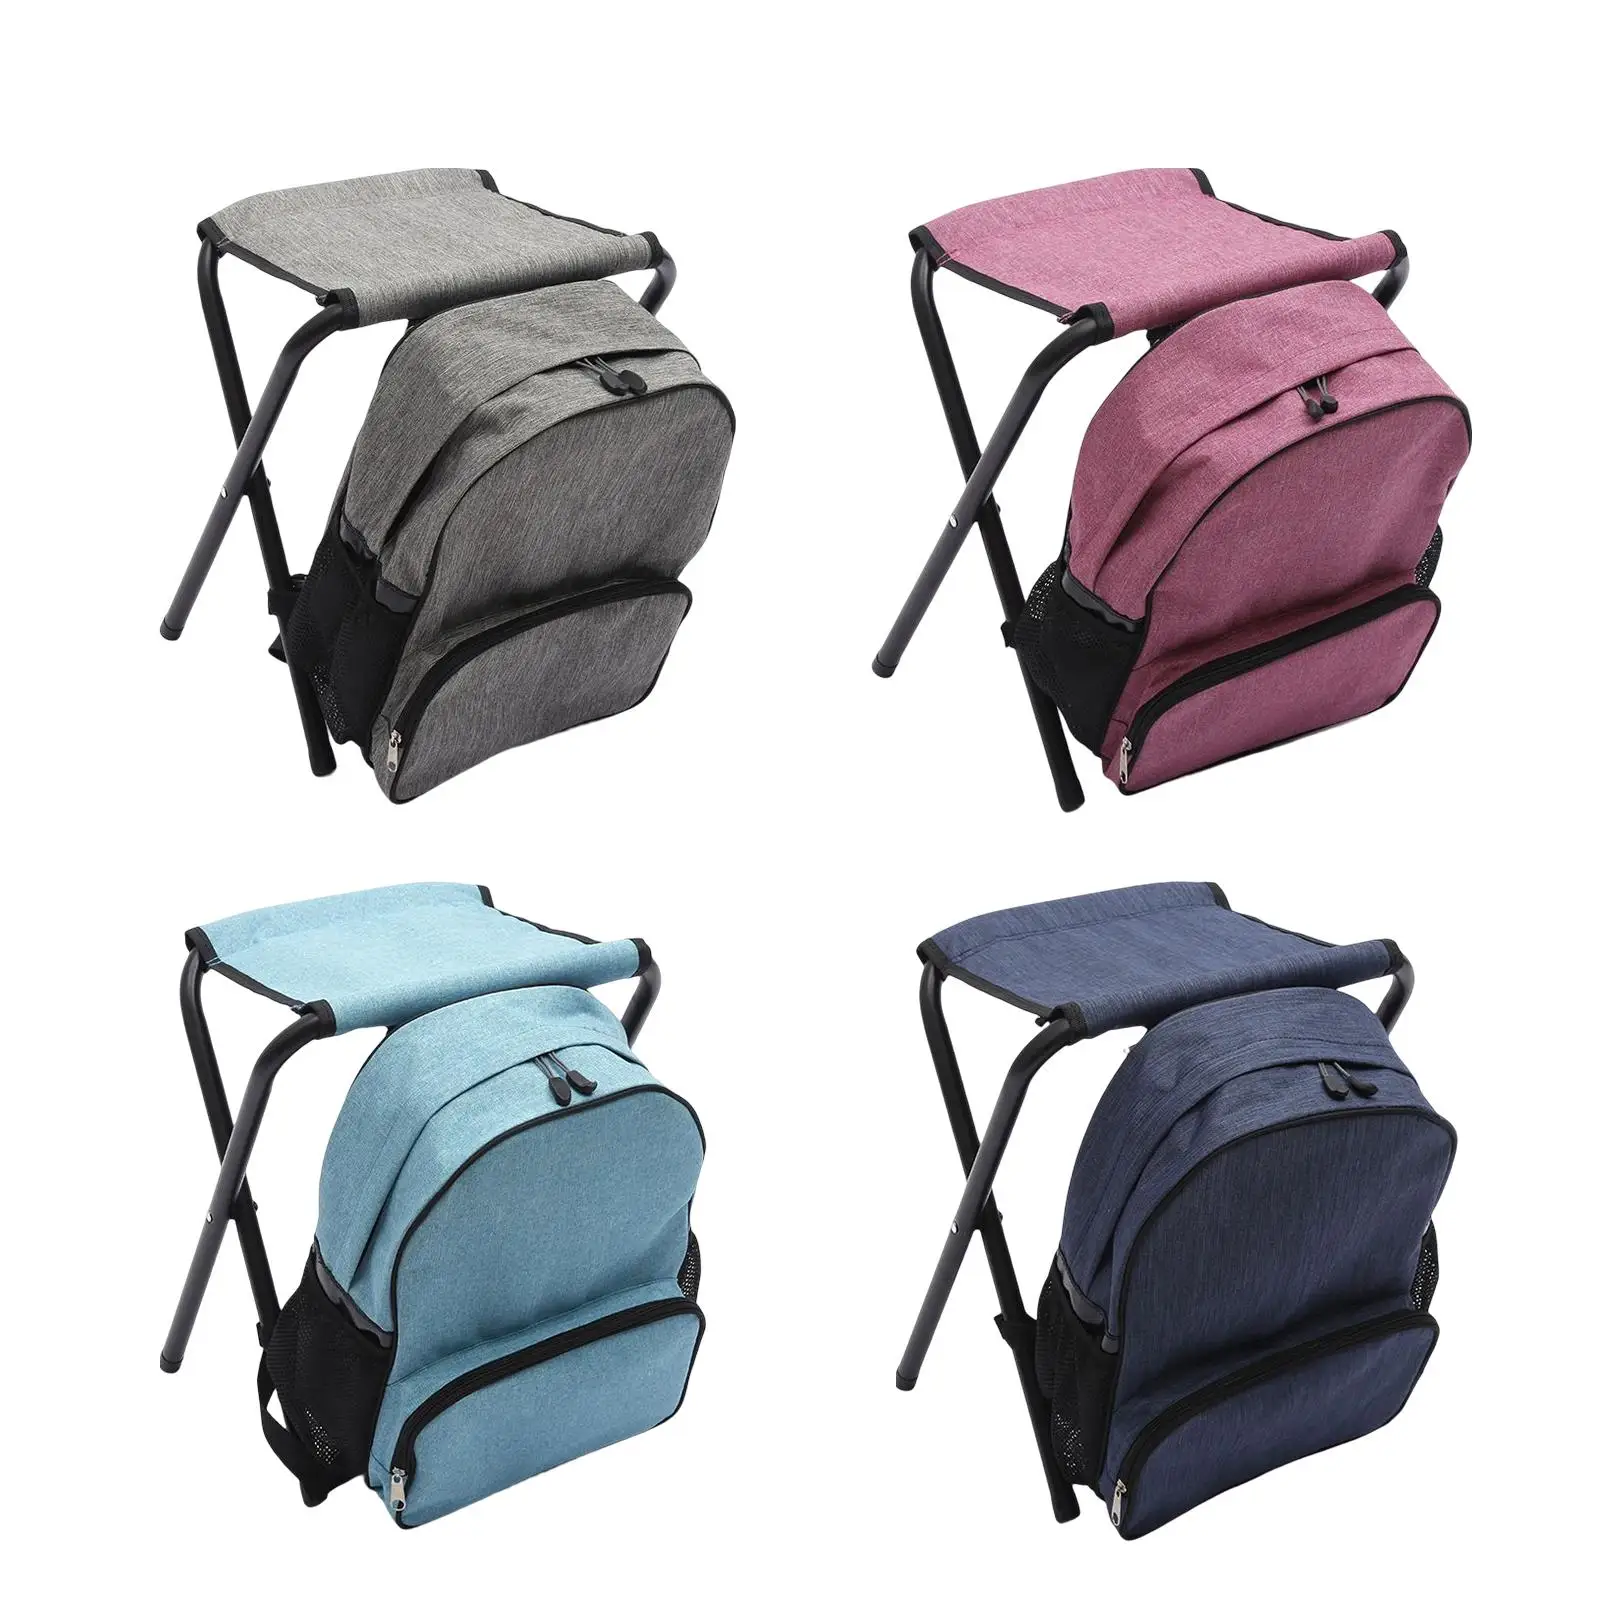 Fishing Seat Portable Multifunction Camp Stool Outdoor Camping Hiking Folding Stool with Bag for Travel Gardening camping